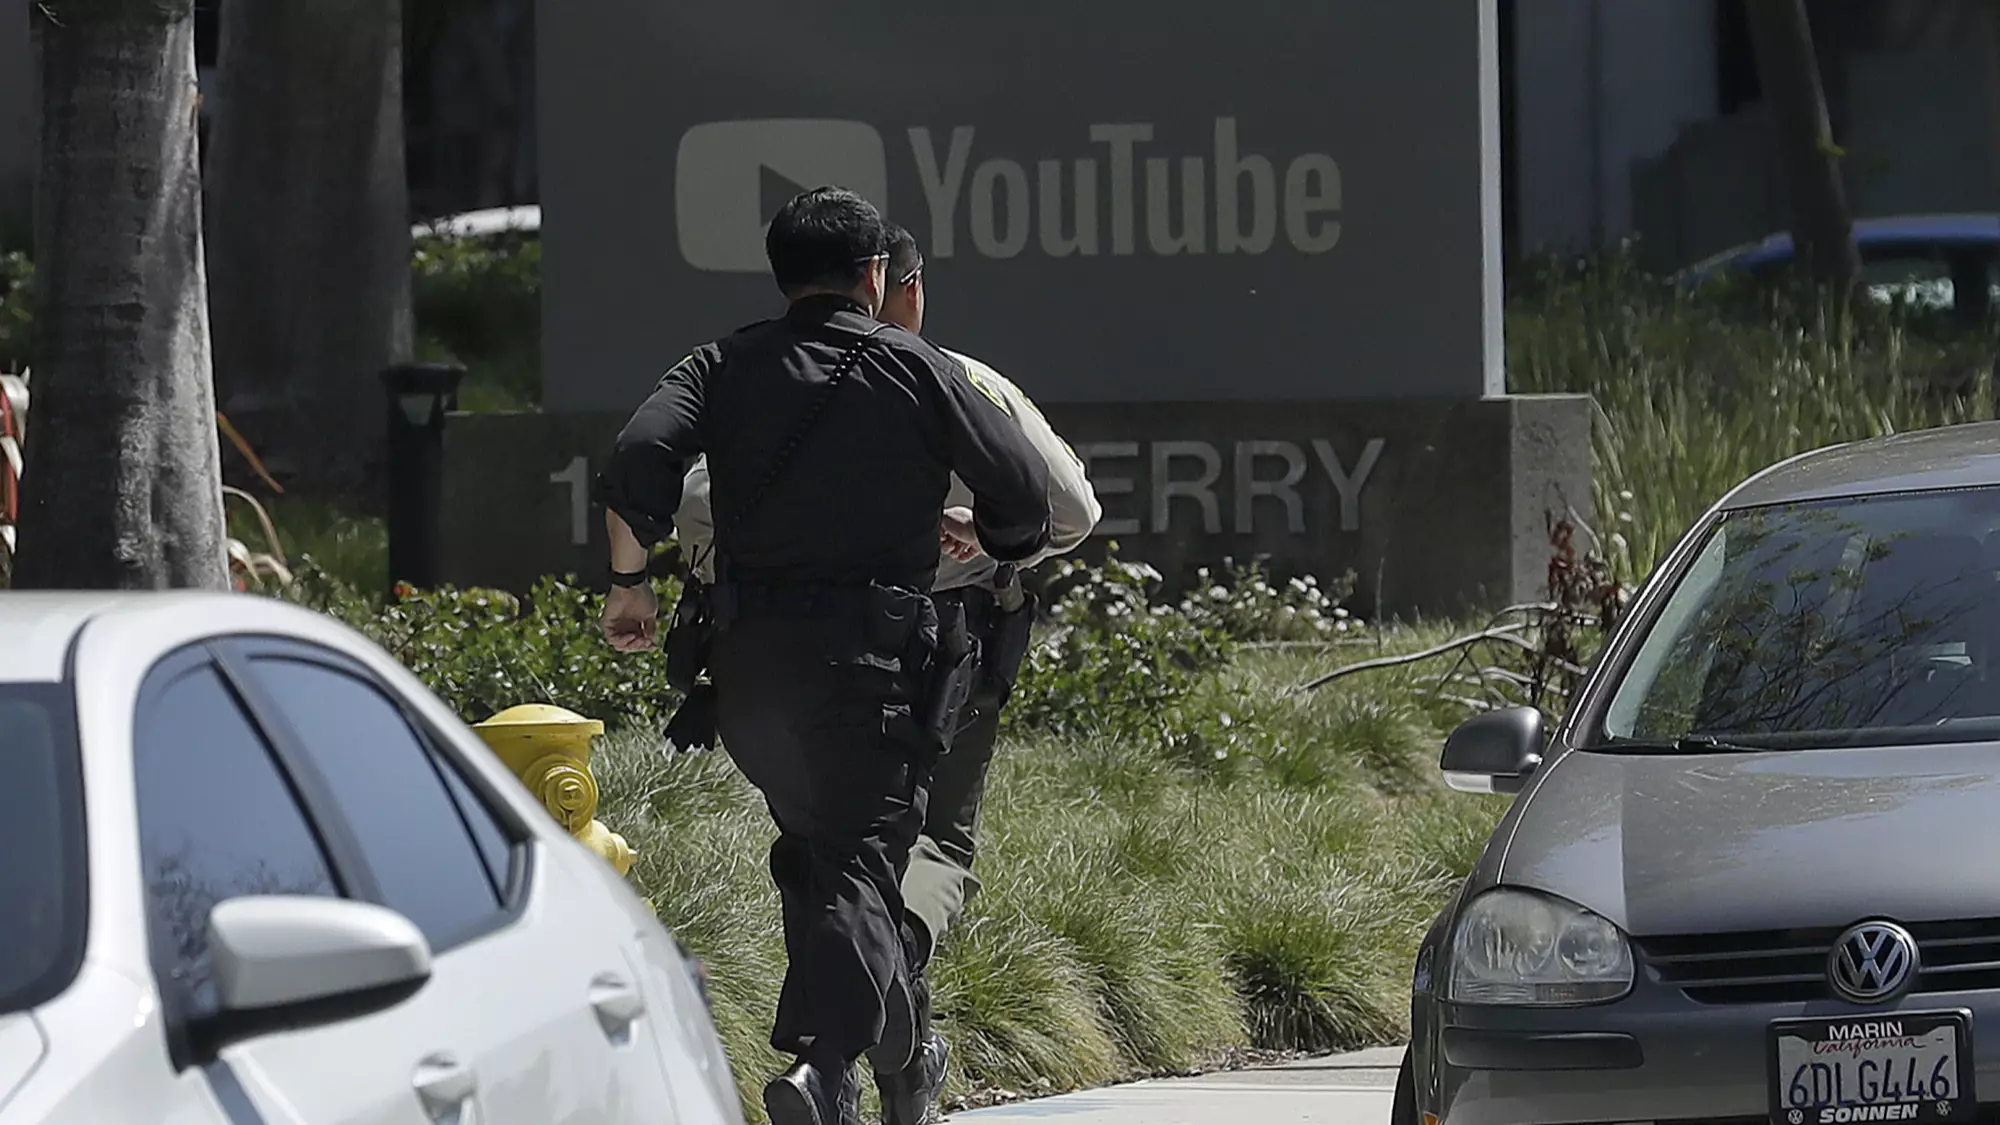 Four Shot At YouTube HQ, Female Suspect Dead From 'Self-Inflicted Wound'